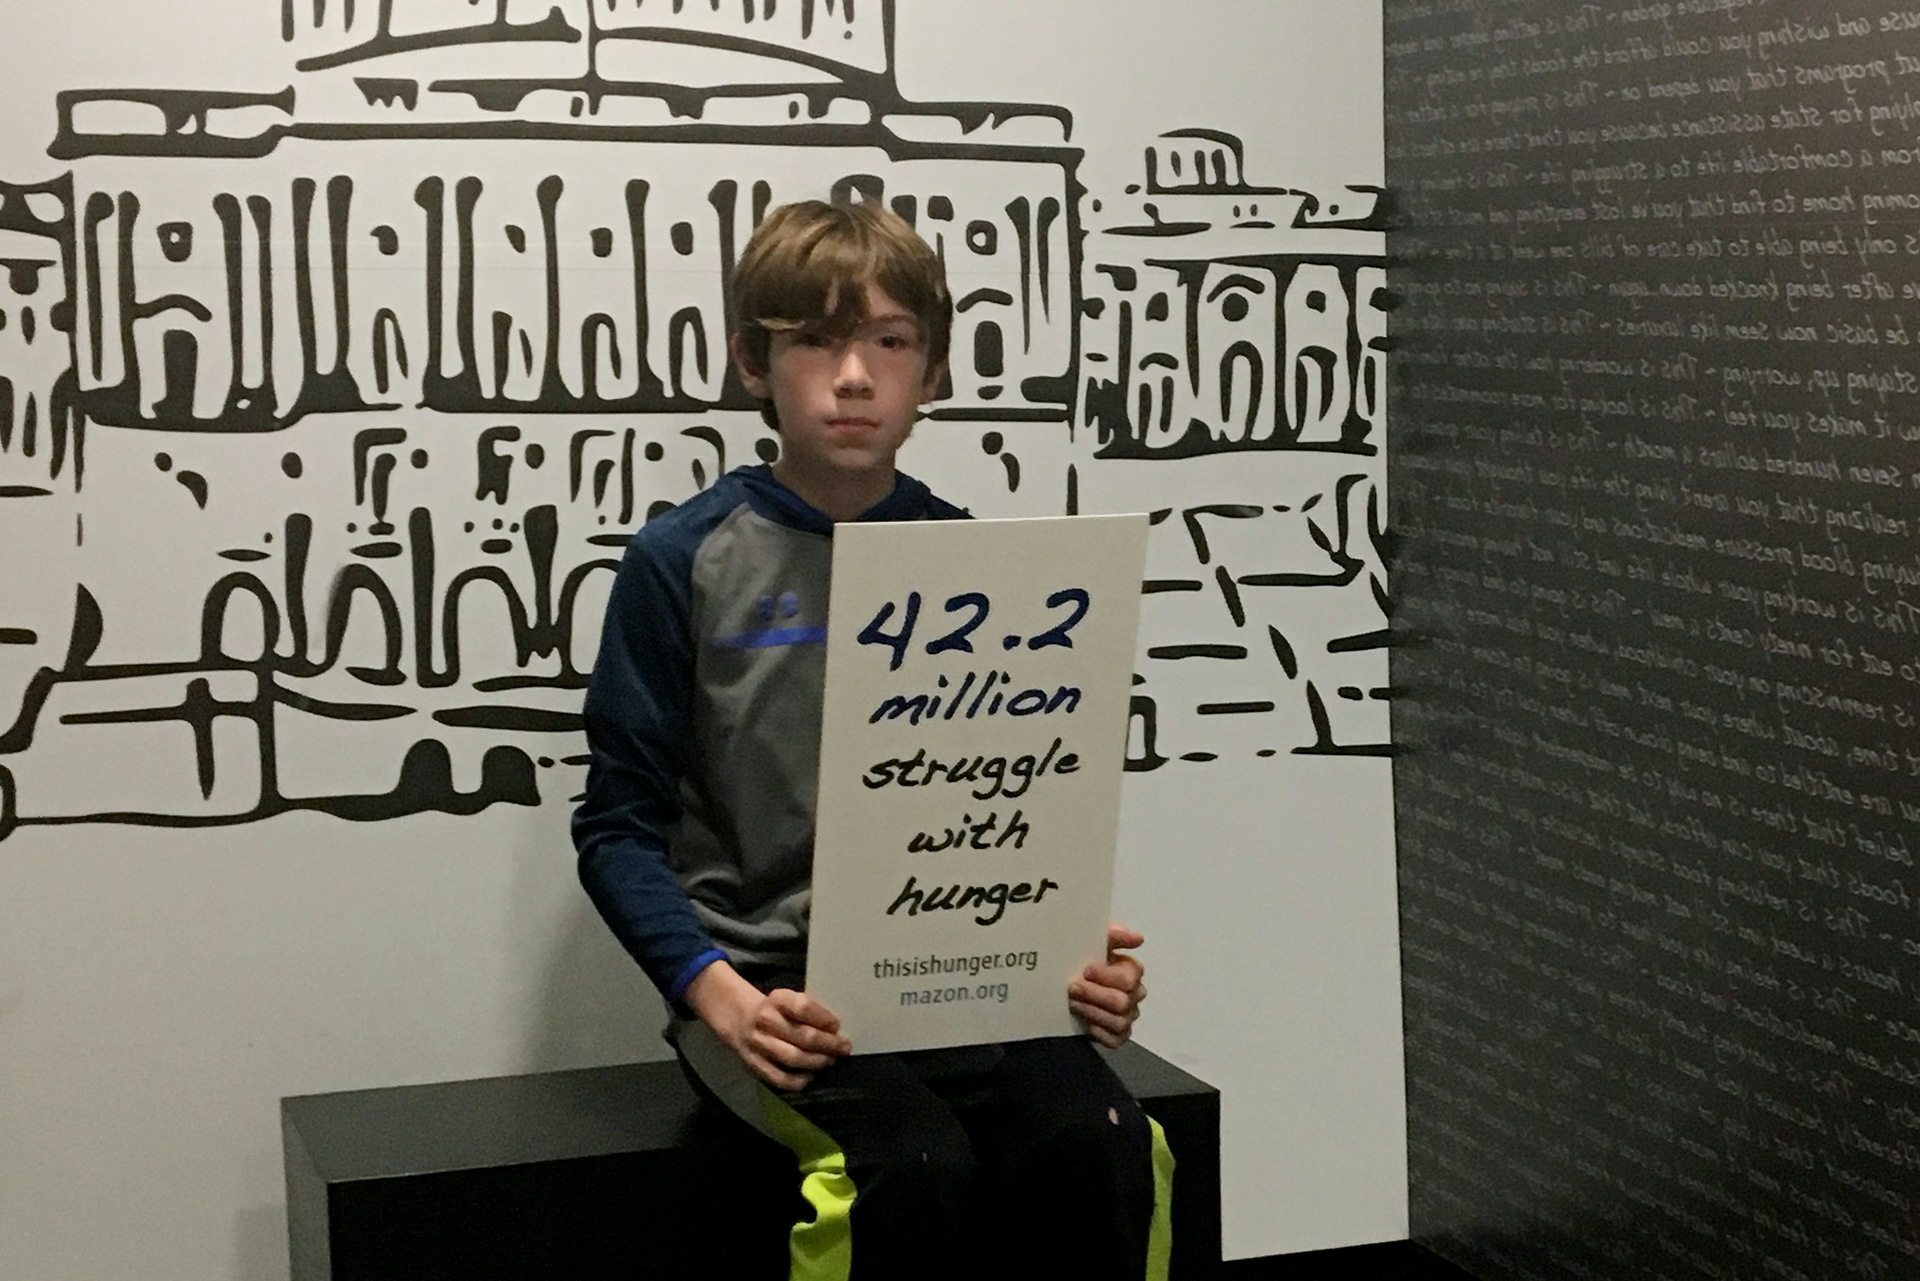 Young boy holding sign that says 42.2 million struggle with hunger.